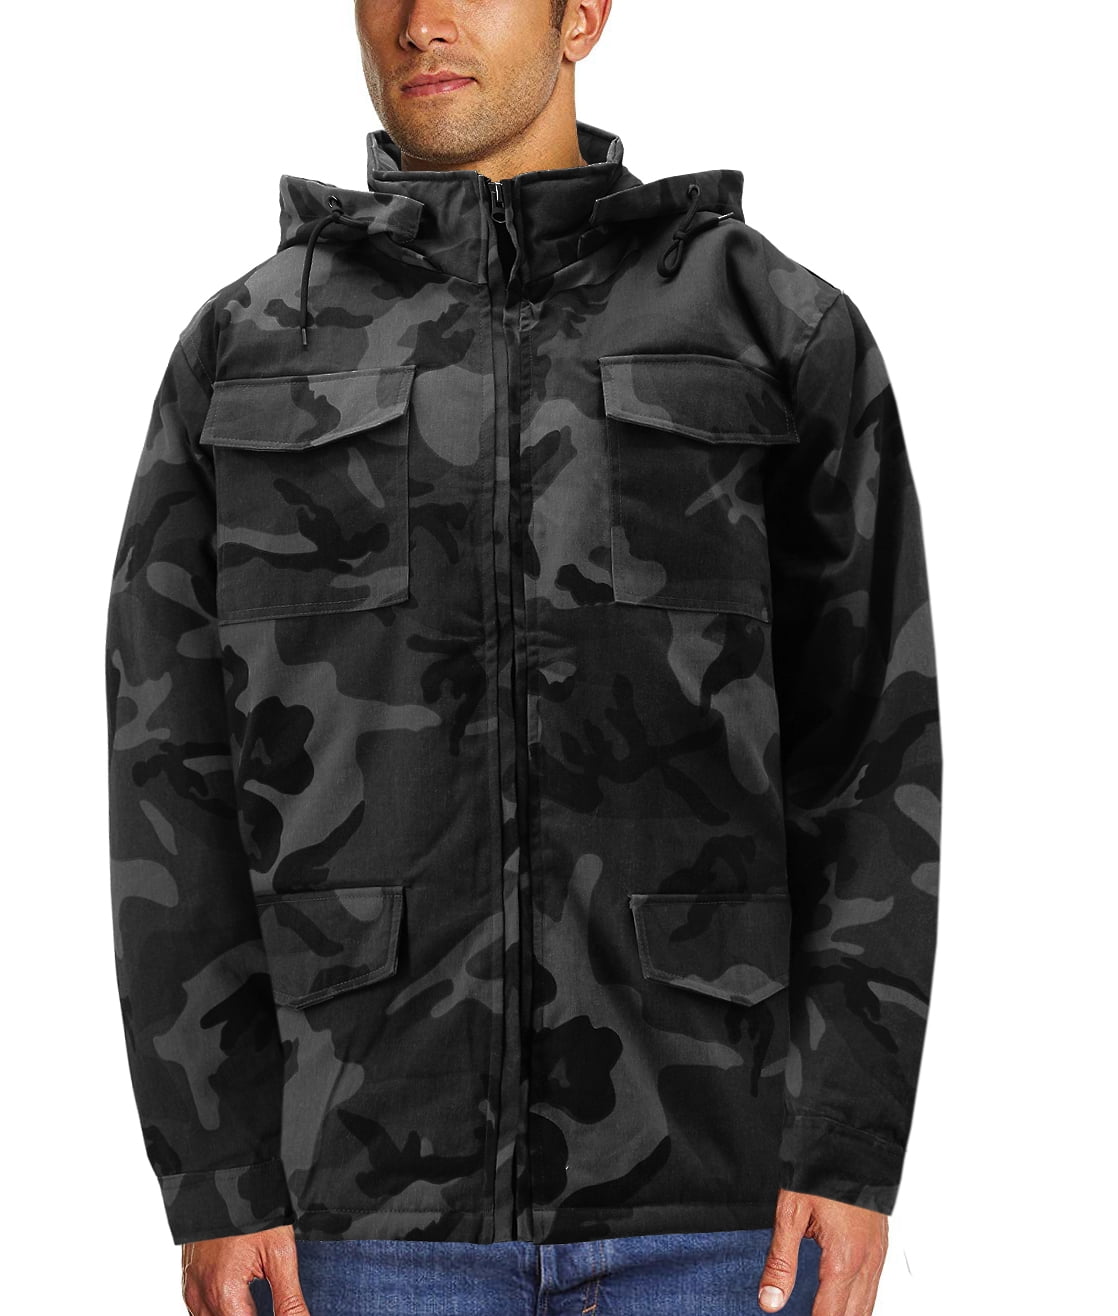 Men's Heavyweight Army Hunting Camo Removable Hood Quilted 